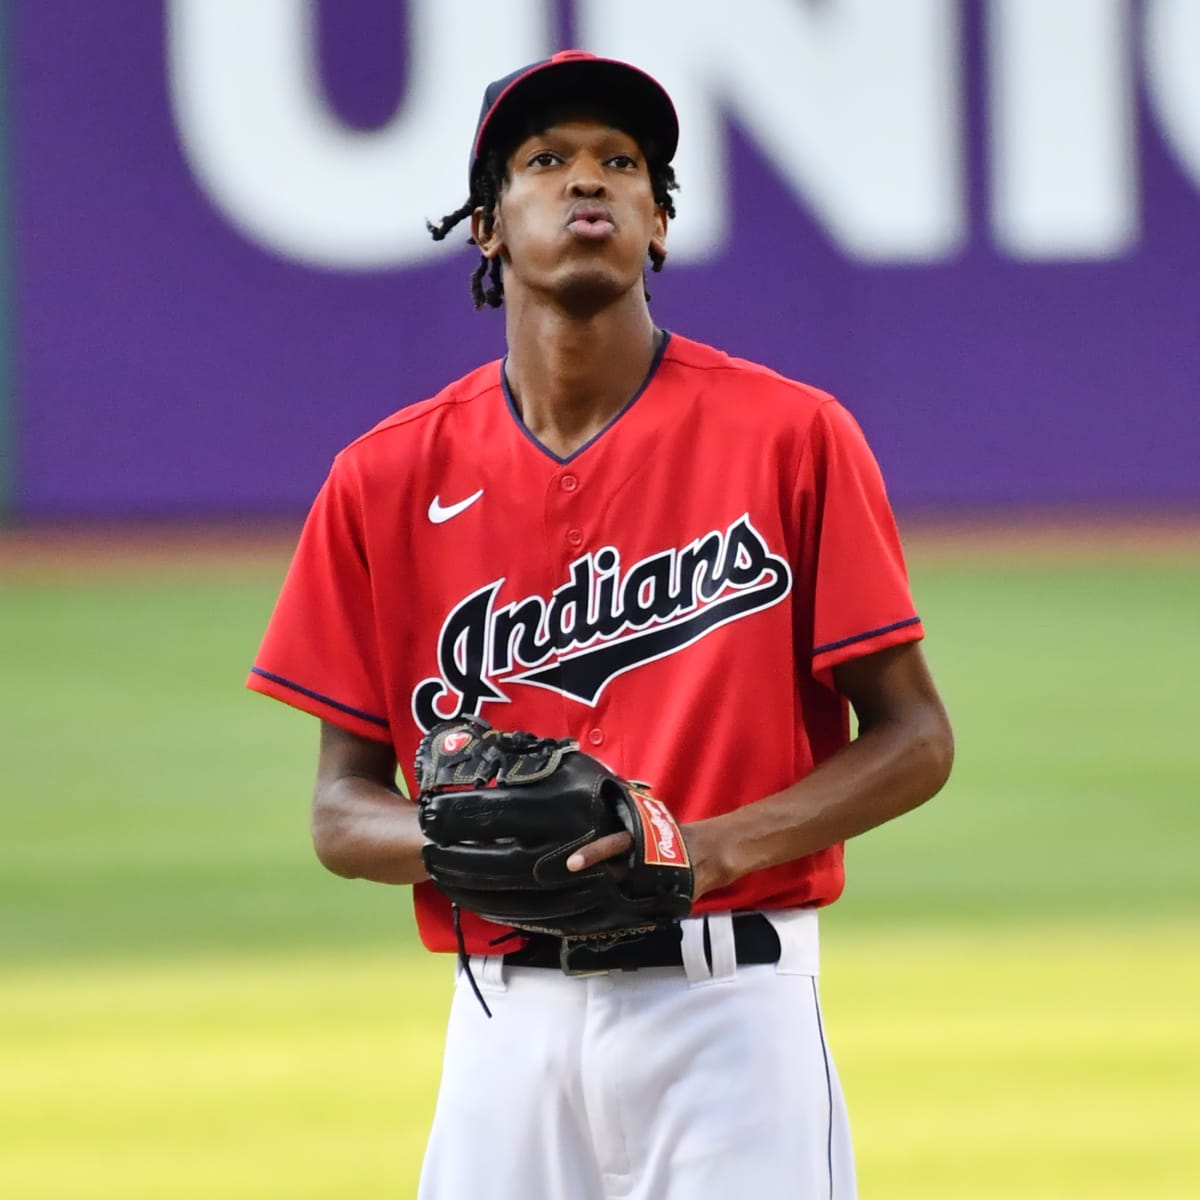 Cleveland Indians rookie Triston McKenzie hungry for more after